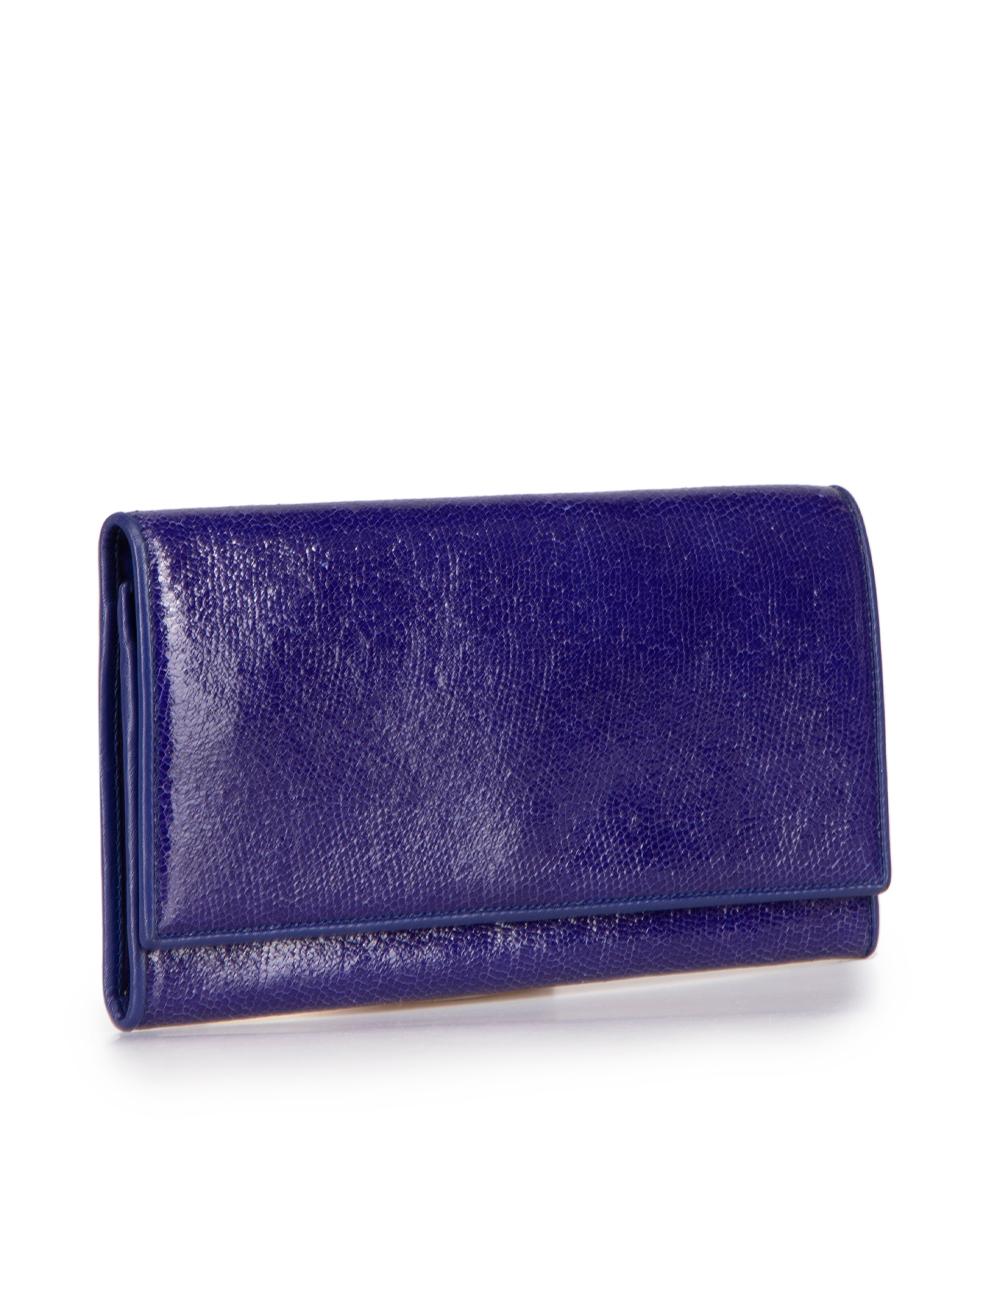 CONDITION is Very good. Minimal wear to wallet is evident. Minimal indents to patent leather on front flap. Indent and abrasion to interior leather on this used Smythson designer resale item.
 
Details
Purple
Patent leather
Travel wallet
Embossed